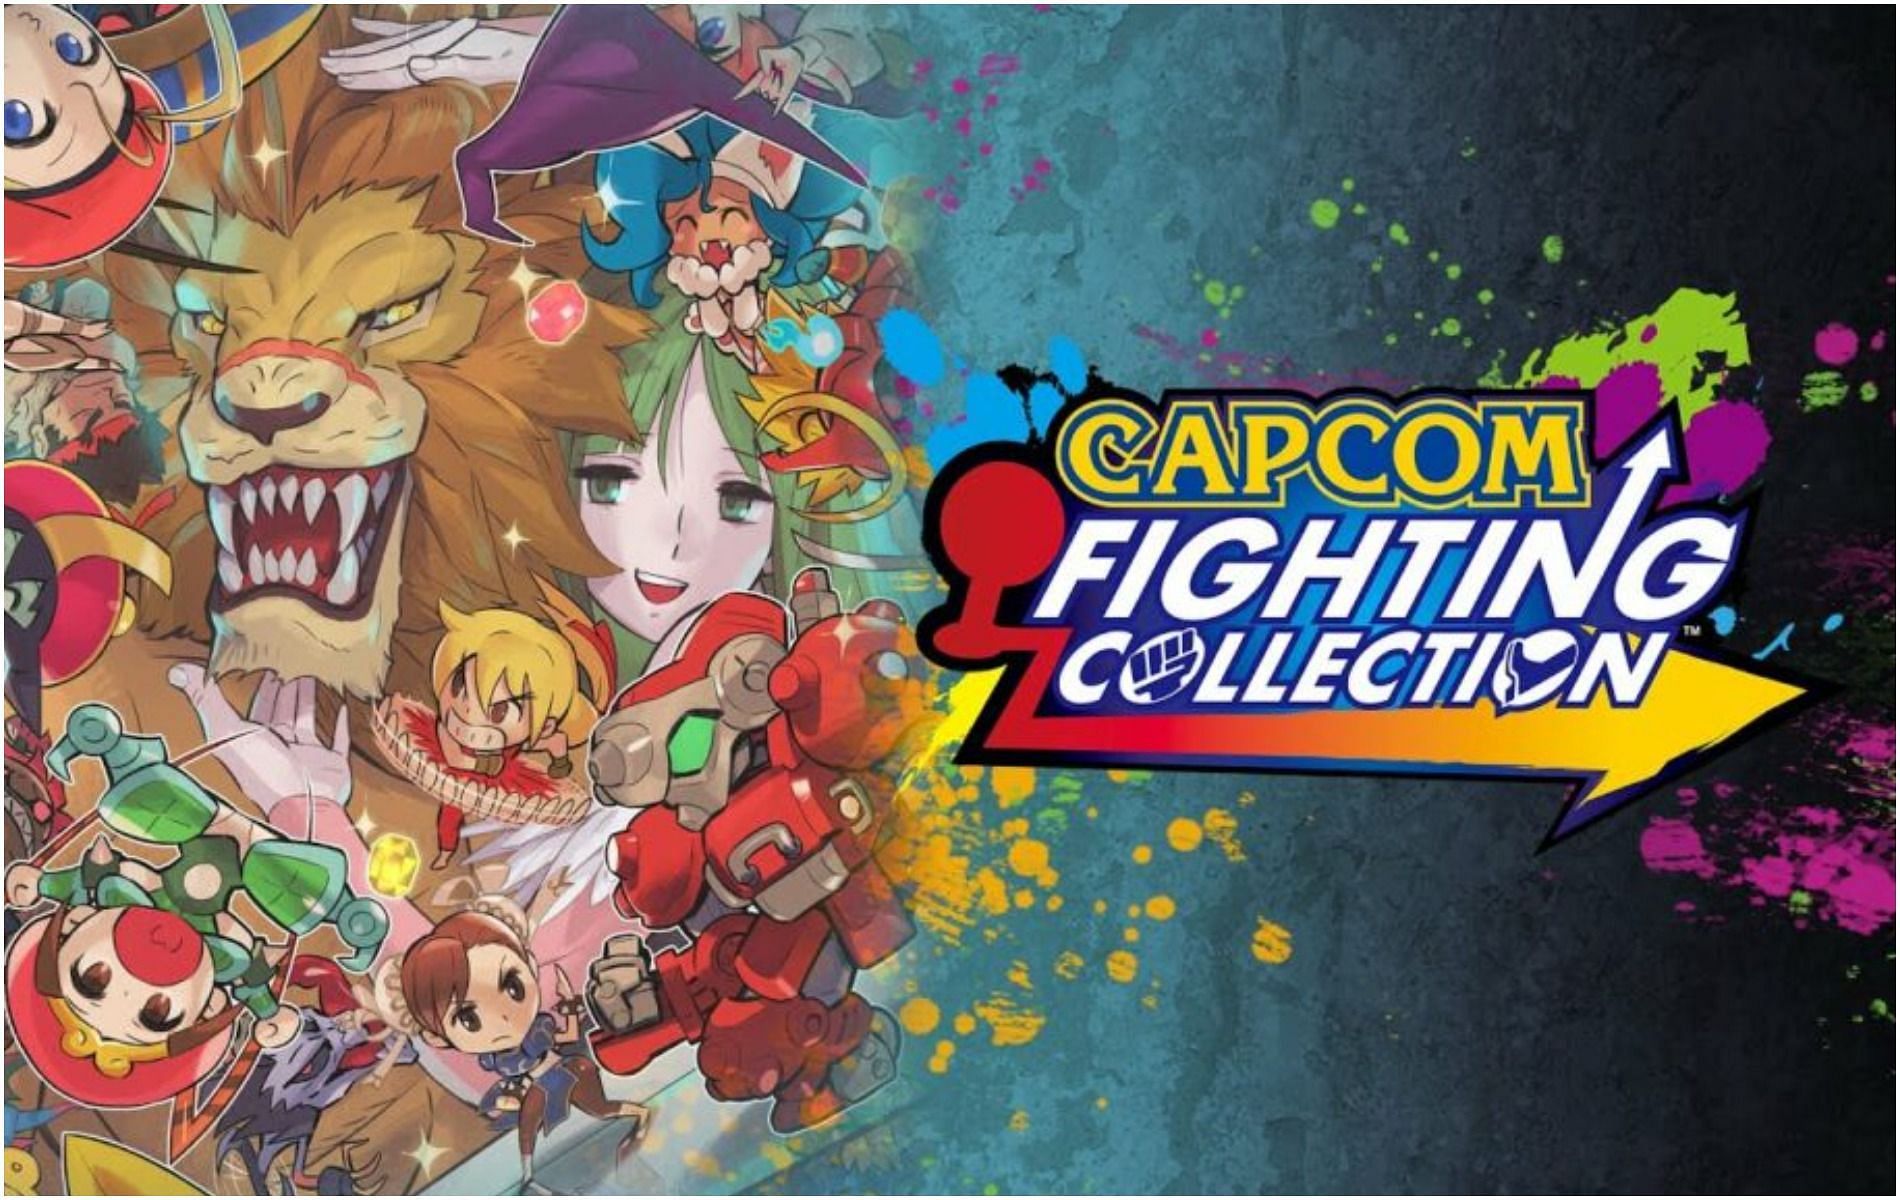 Capcom has announced a Fighting Collection which has 10 great games (Image via Capcom)